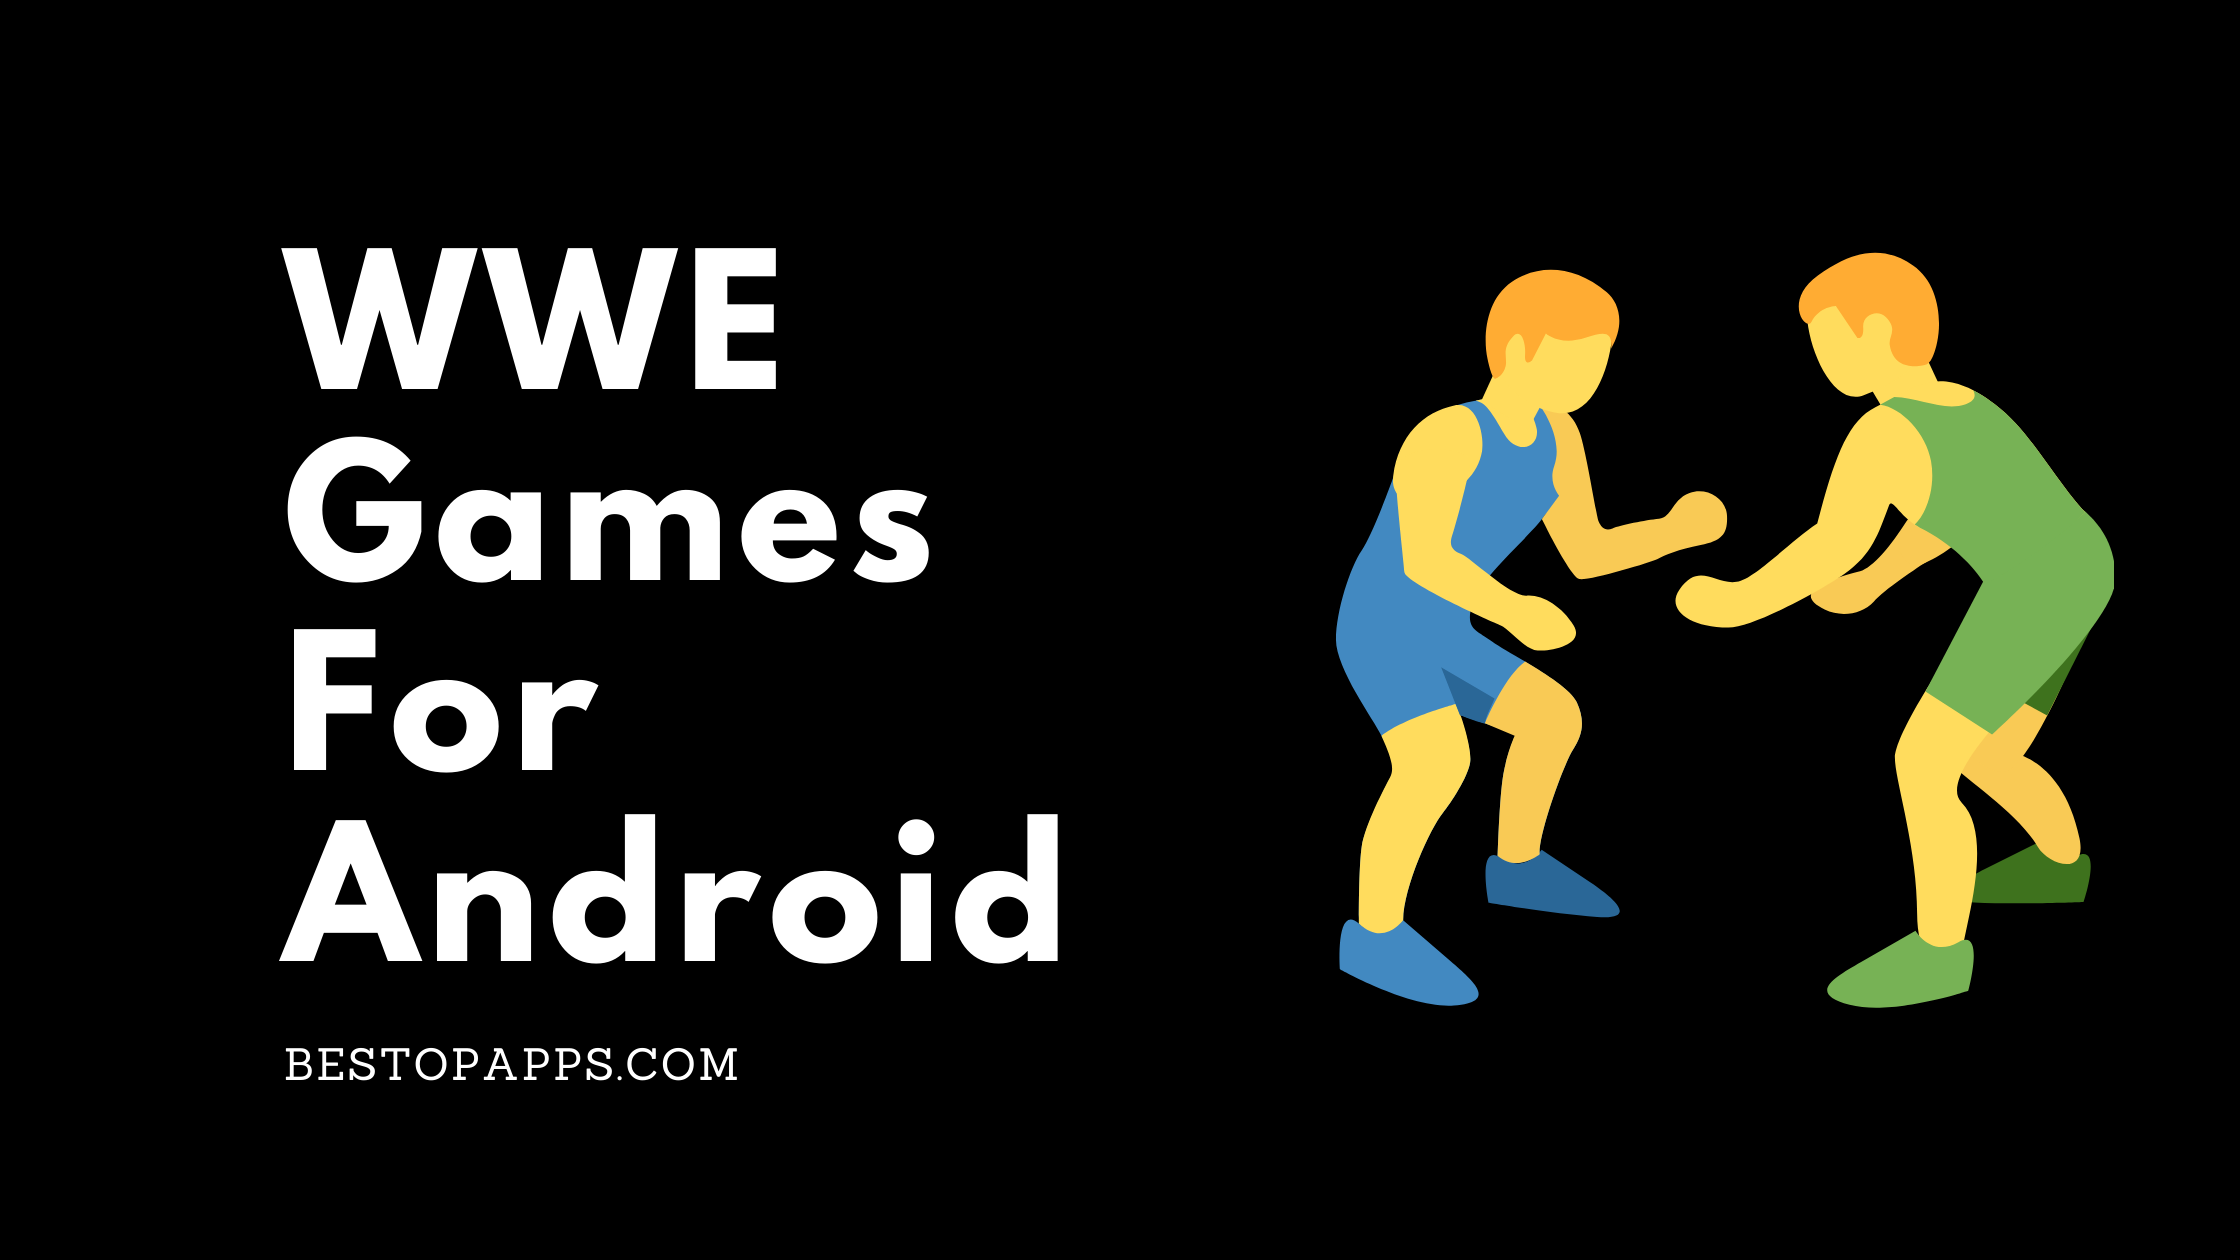 WWE Games For Android